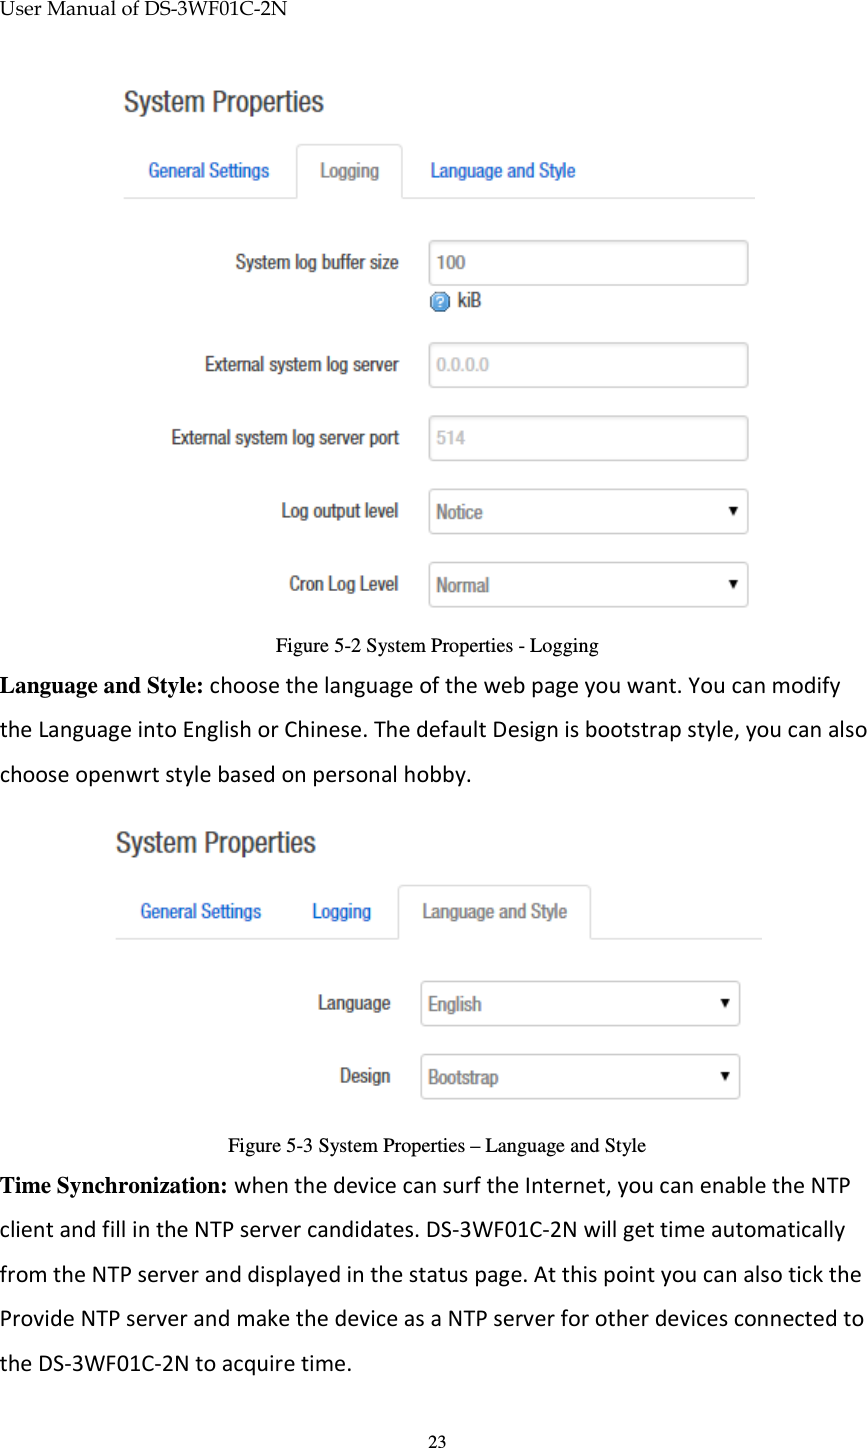 User Manual of DS-3WF01C-2N   23 Figure 5-2 System Properties - Logging Language and Style: choose the language of the web page you want. You can modify the Language into English or Chinese. The default Design is bootstrap style, you can also choose openwrt style based on personal hobby.  Figure 5-3 System Properties – Language and Style Time Synchronization: when the device can surf the Internet, you can enable the NTP client and fill in the NTP server candidates. DS-3WF01C-2N will get time automatically from the NTP server and displayed in the status page. At this point you can also tick the Provide NTP server and make the device as a NTP server for other devices connected to the DS-3WF01C-2N to acquire time. 